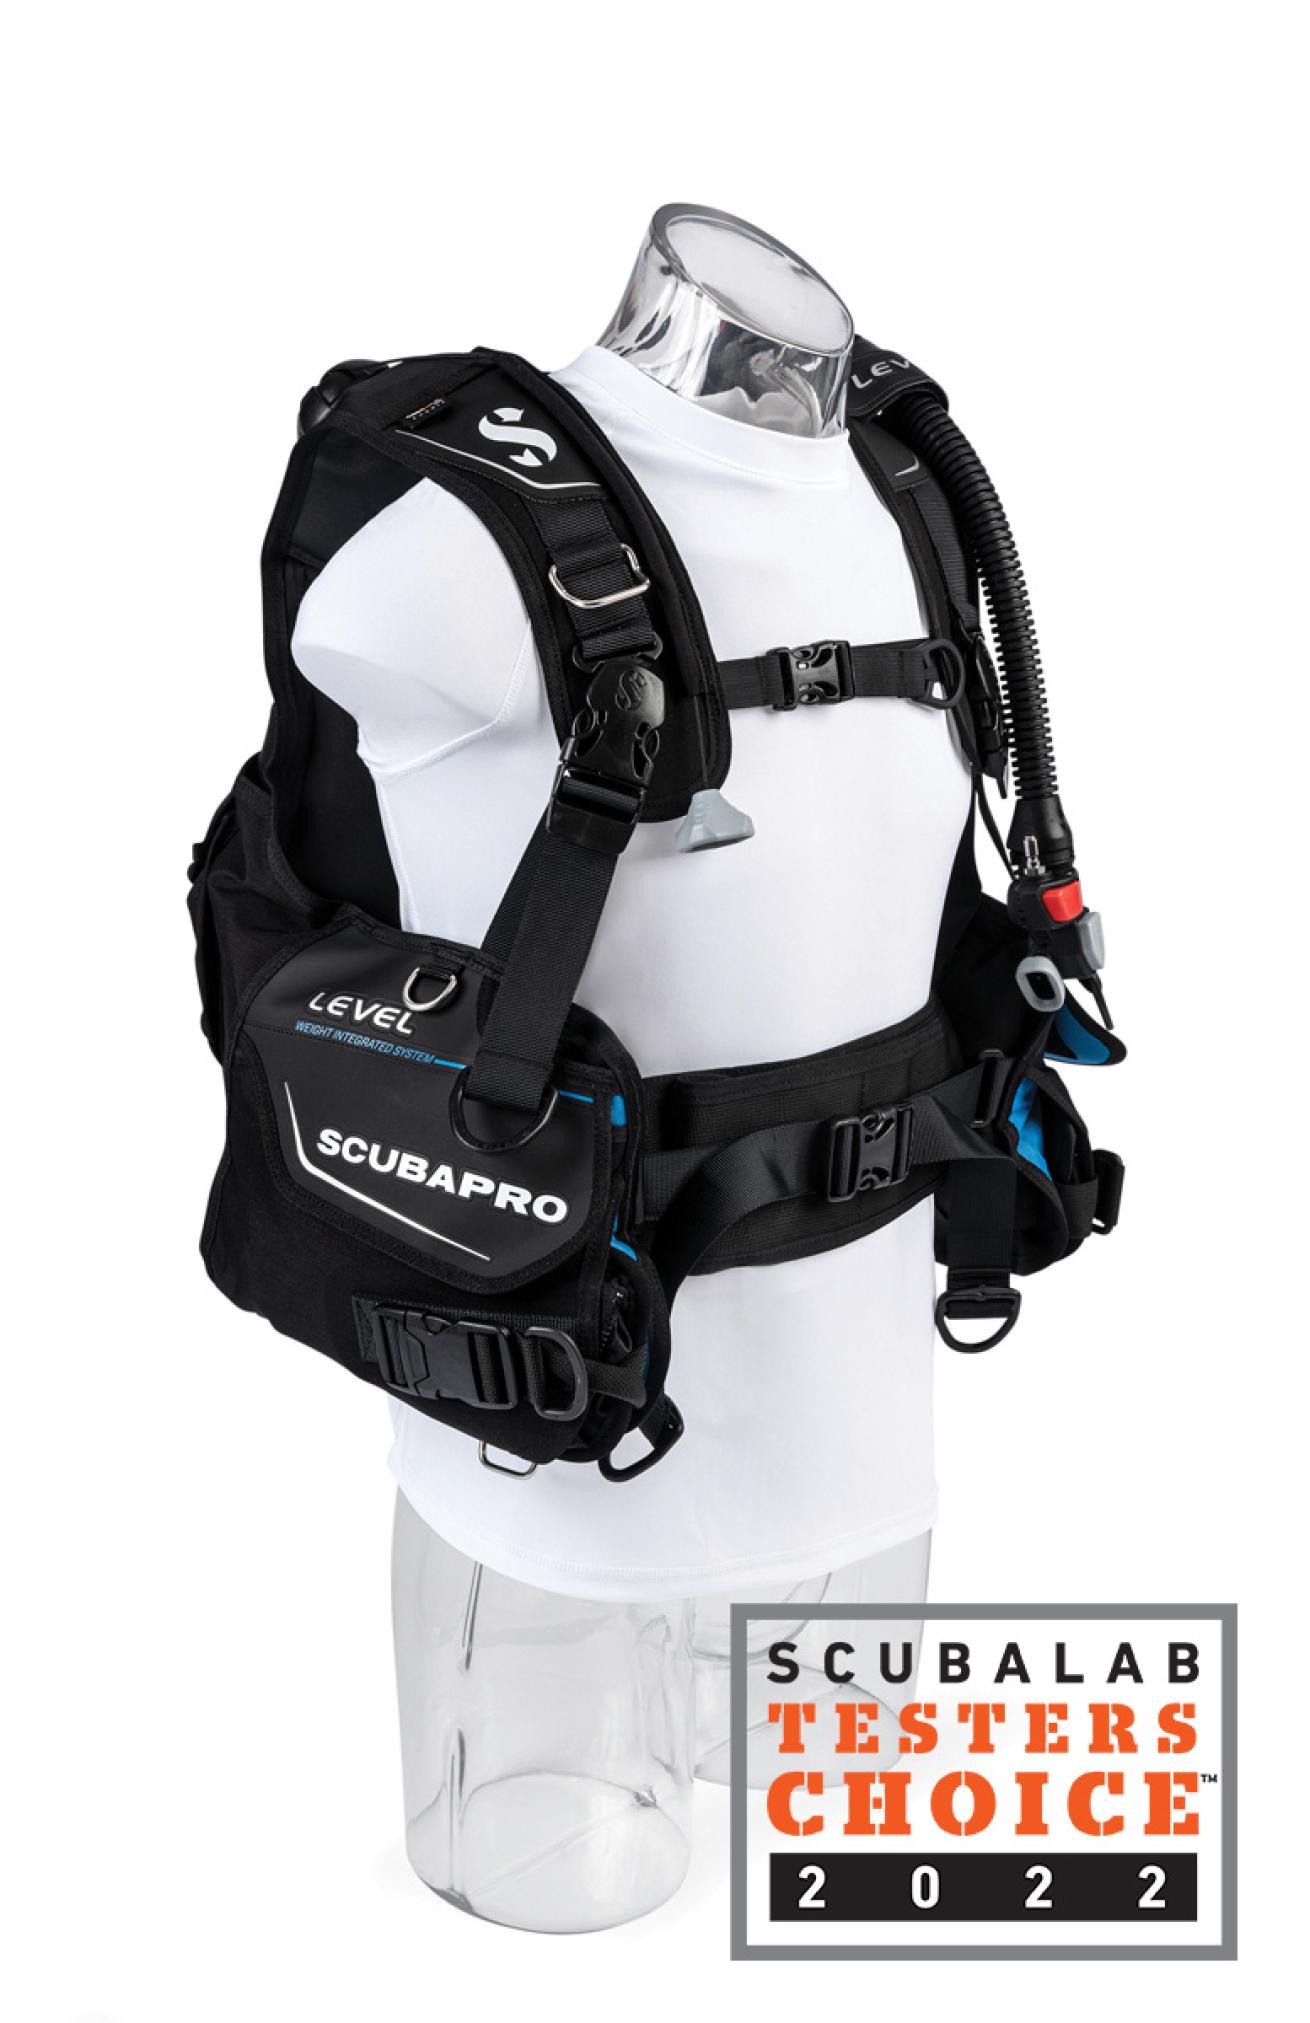 Scubapro Level BCD with Testers Choice logo